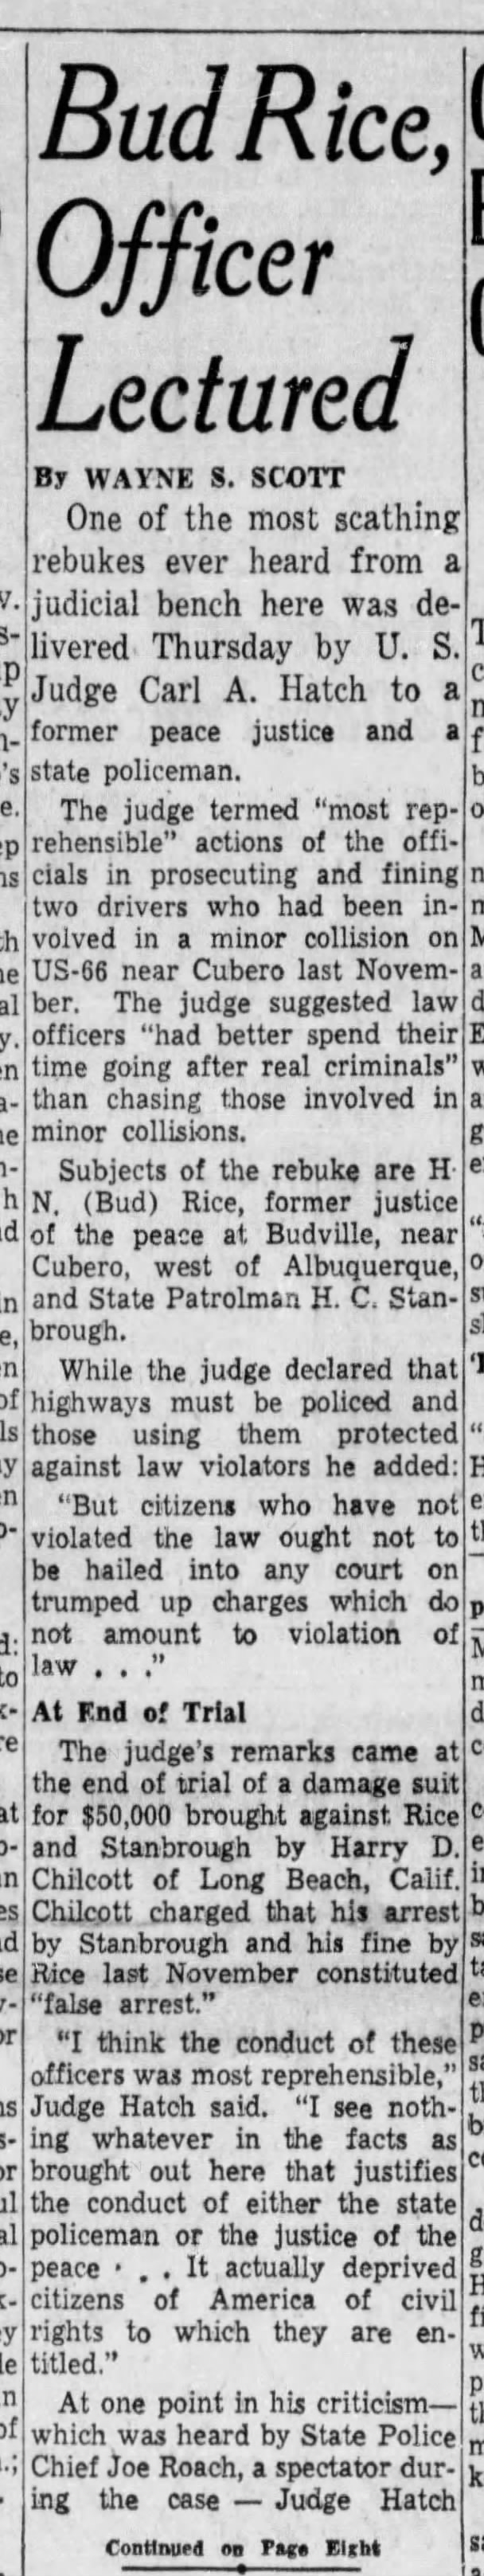 Bud Rice, Officer Lectured by Judge
May 27, 1955
Bud Rice of Budville, NM